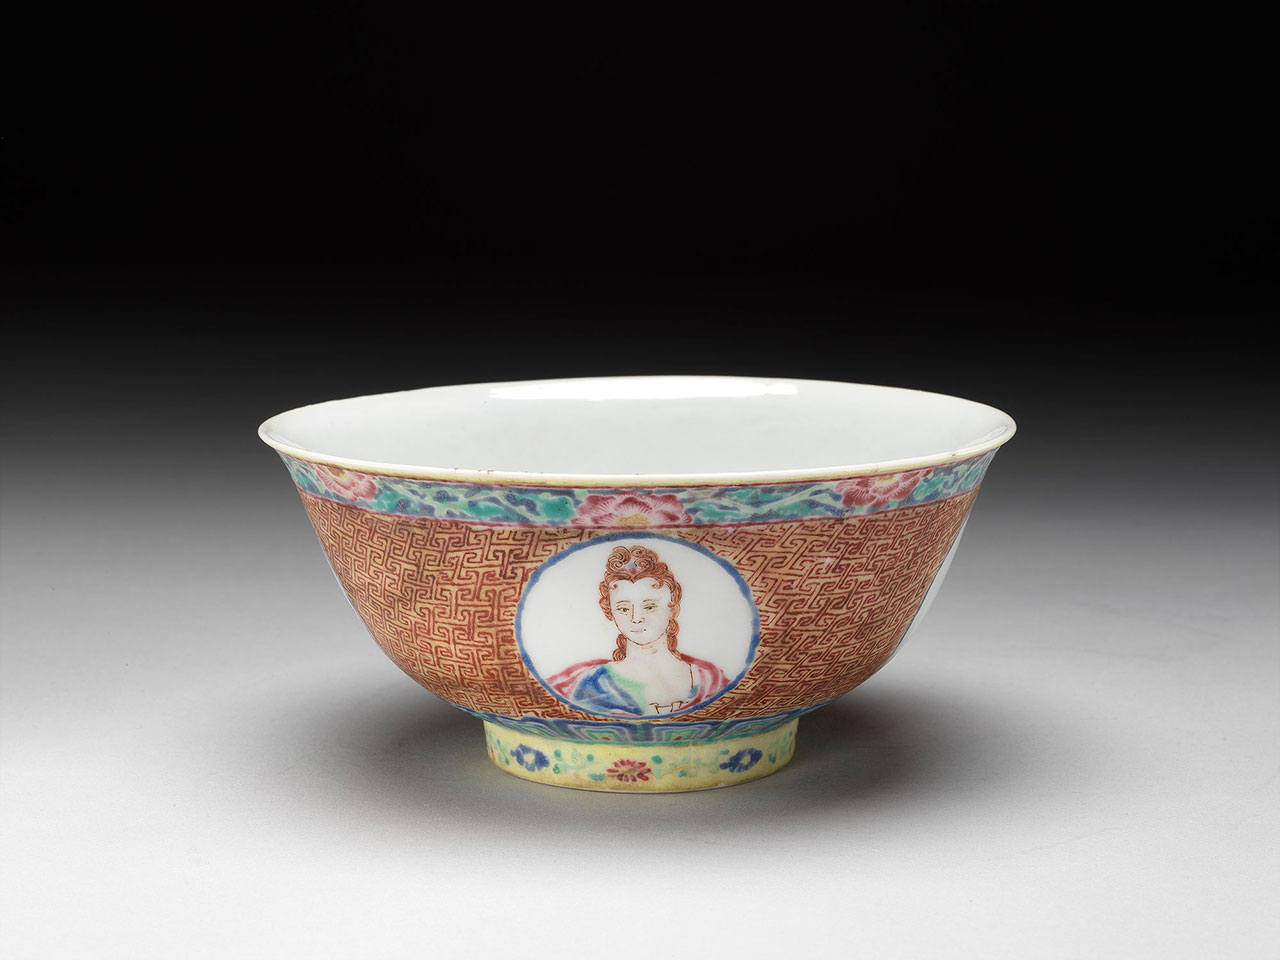 Bowl with portraits of Western lady and geometric pattern